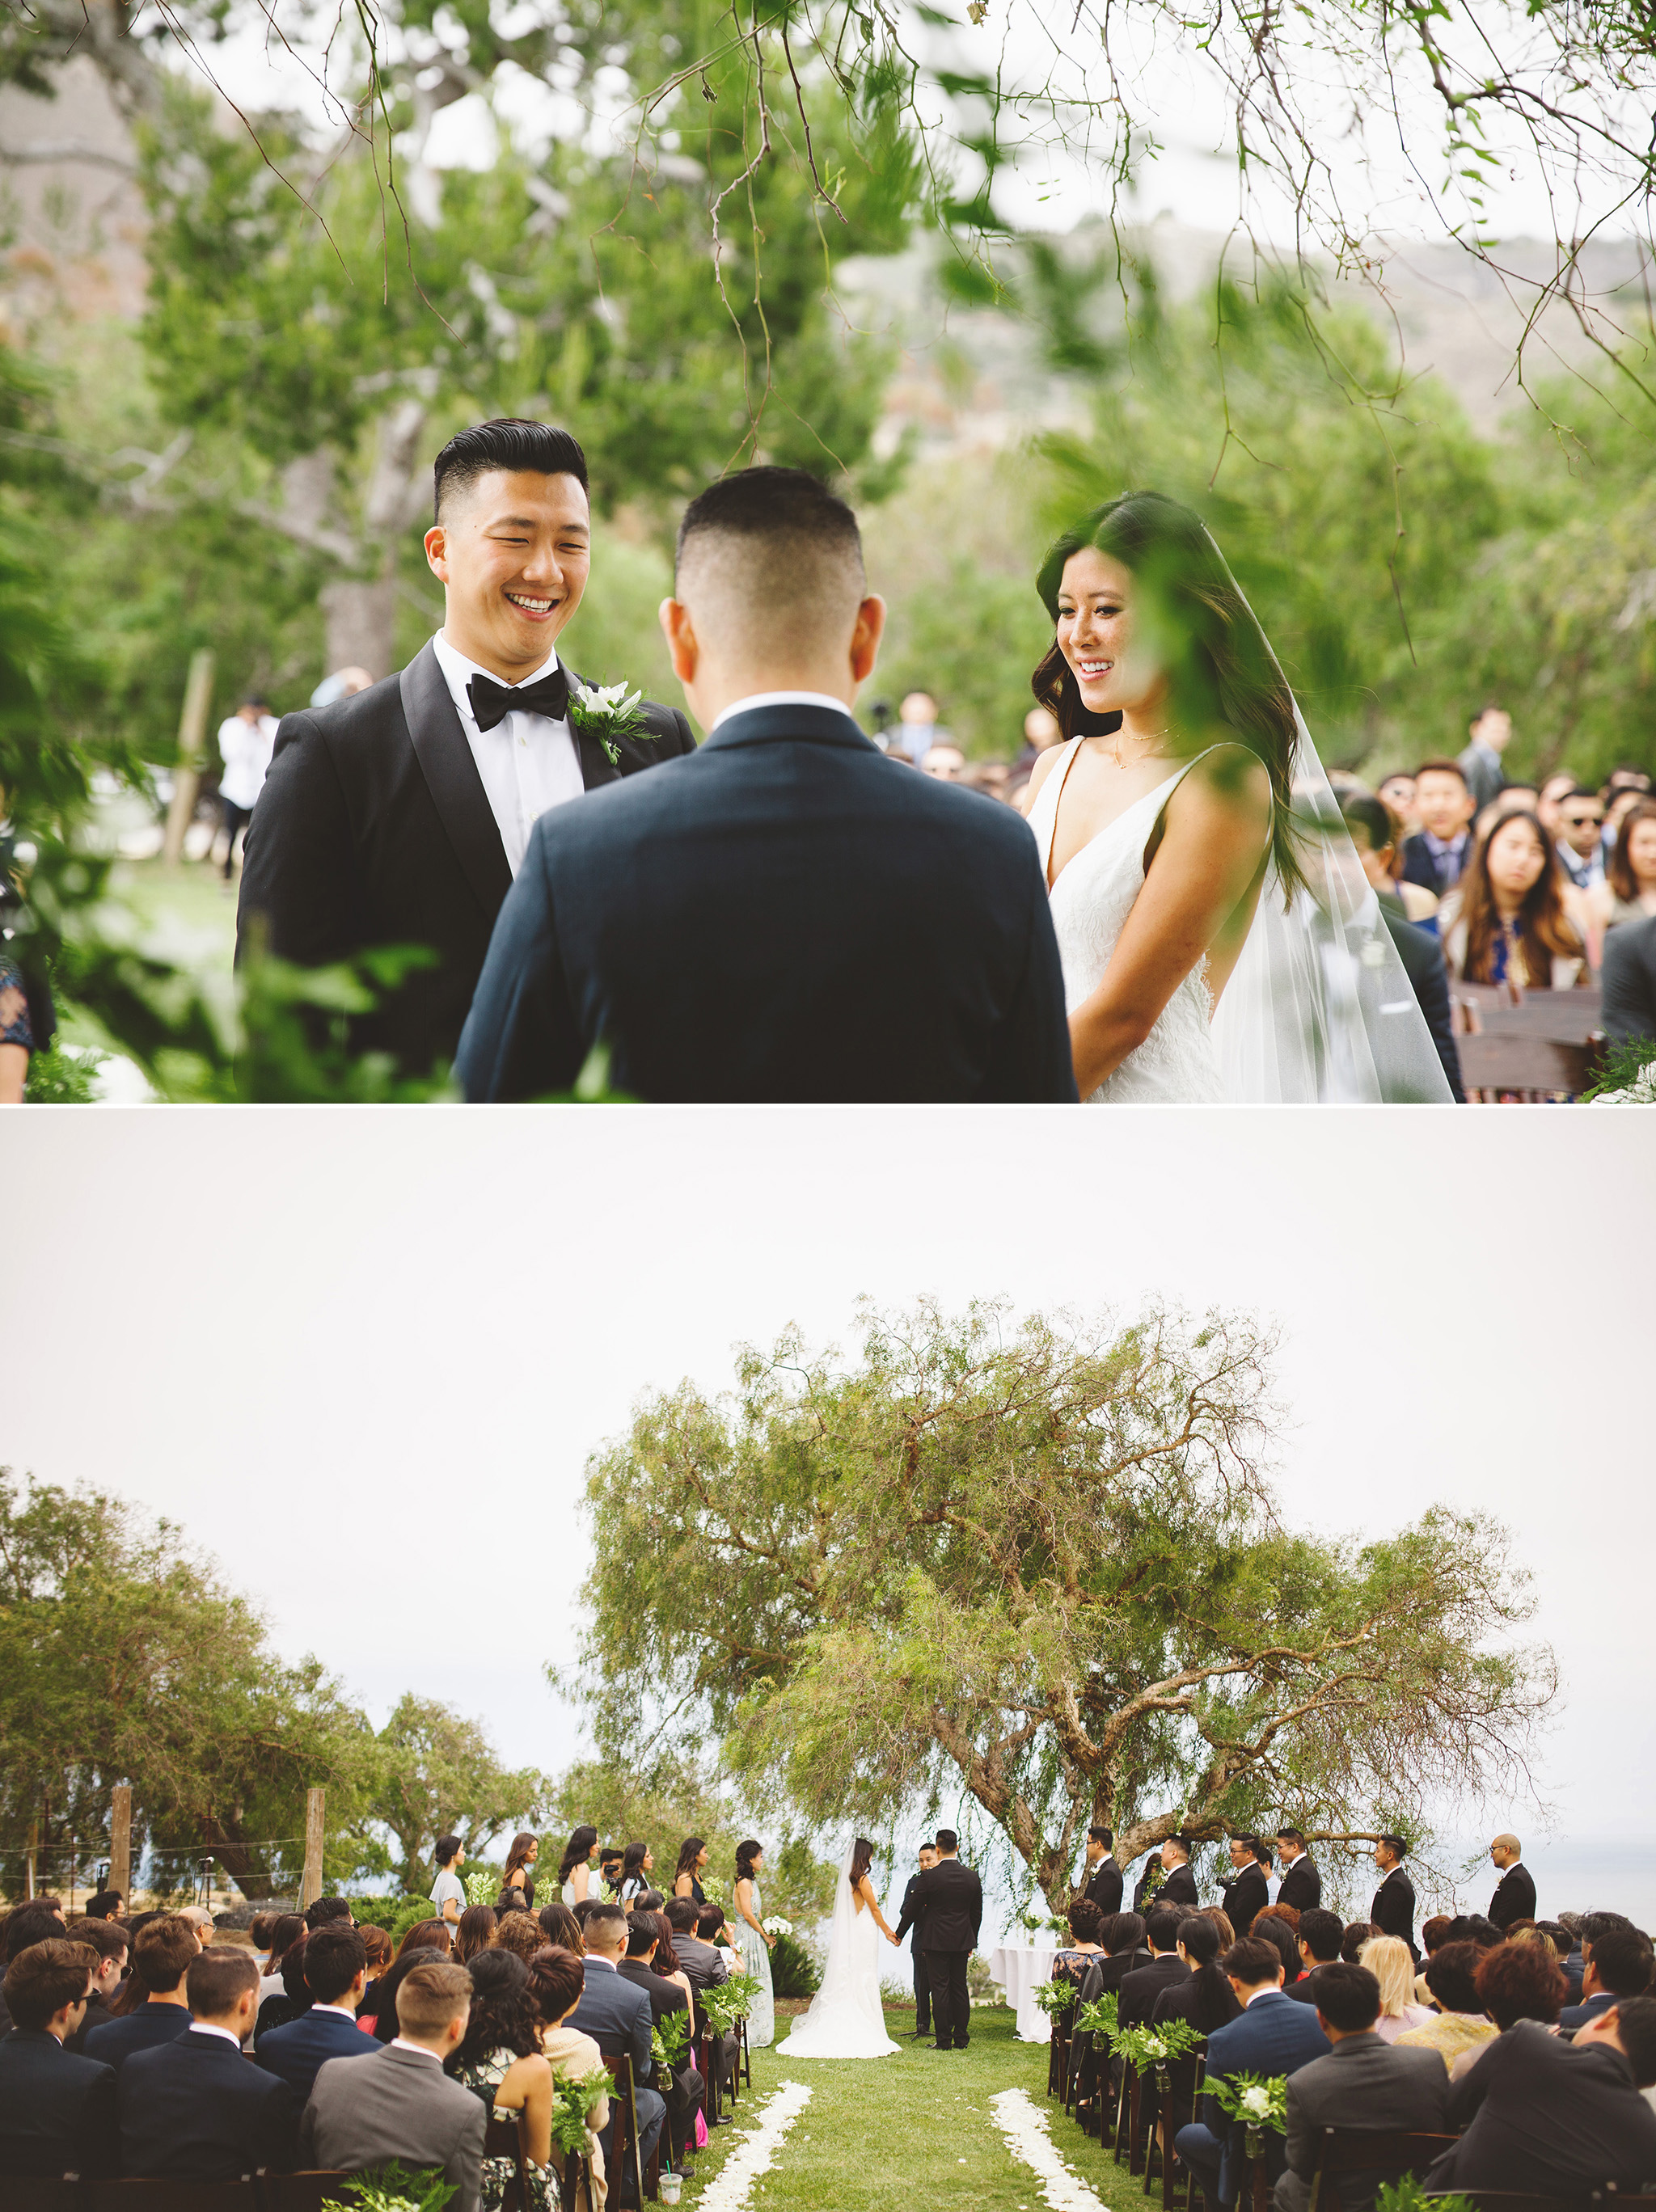 Ceremony at Catalina View Gardens